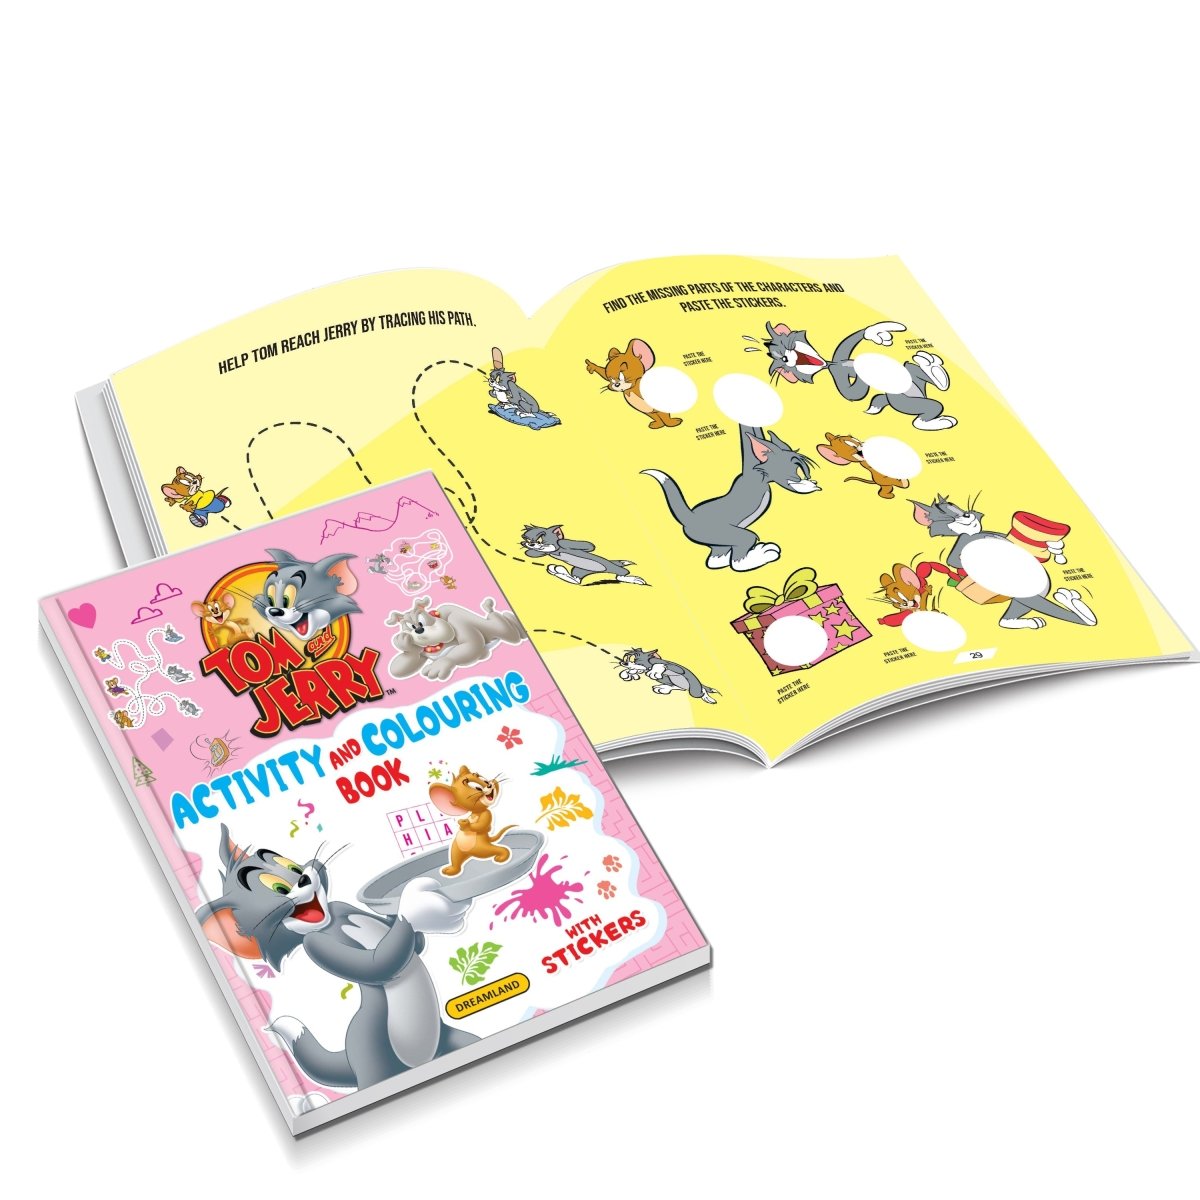 Dreamland Publications Tom and Jerry Copy Colouring And Activity Books Pack ( A Pack of 3 Books) - 9789394767867